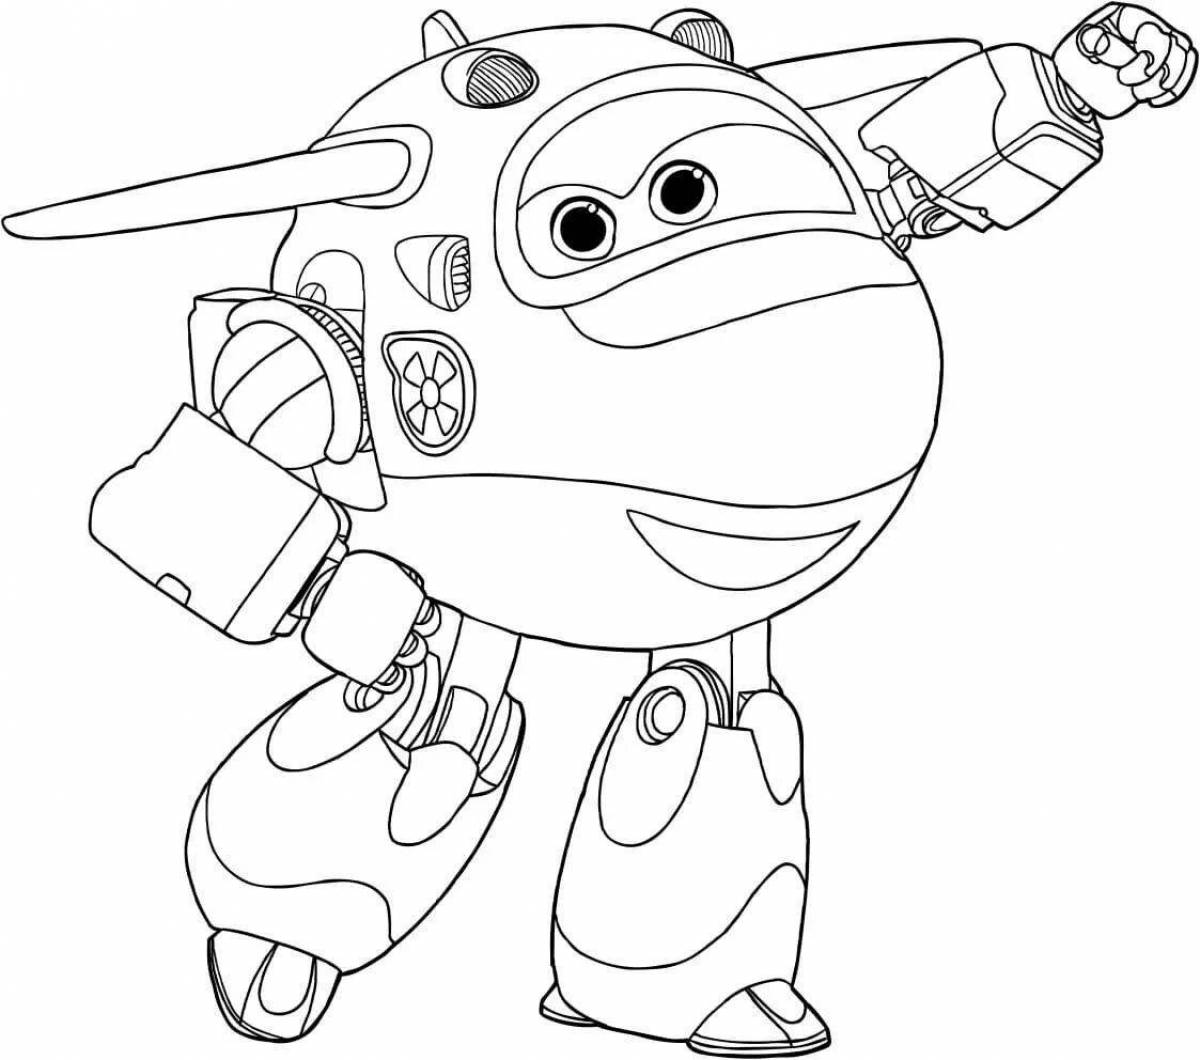 Coloring book amazing donnie super wings